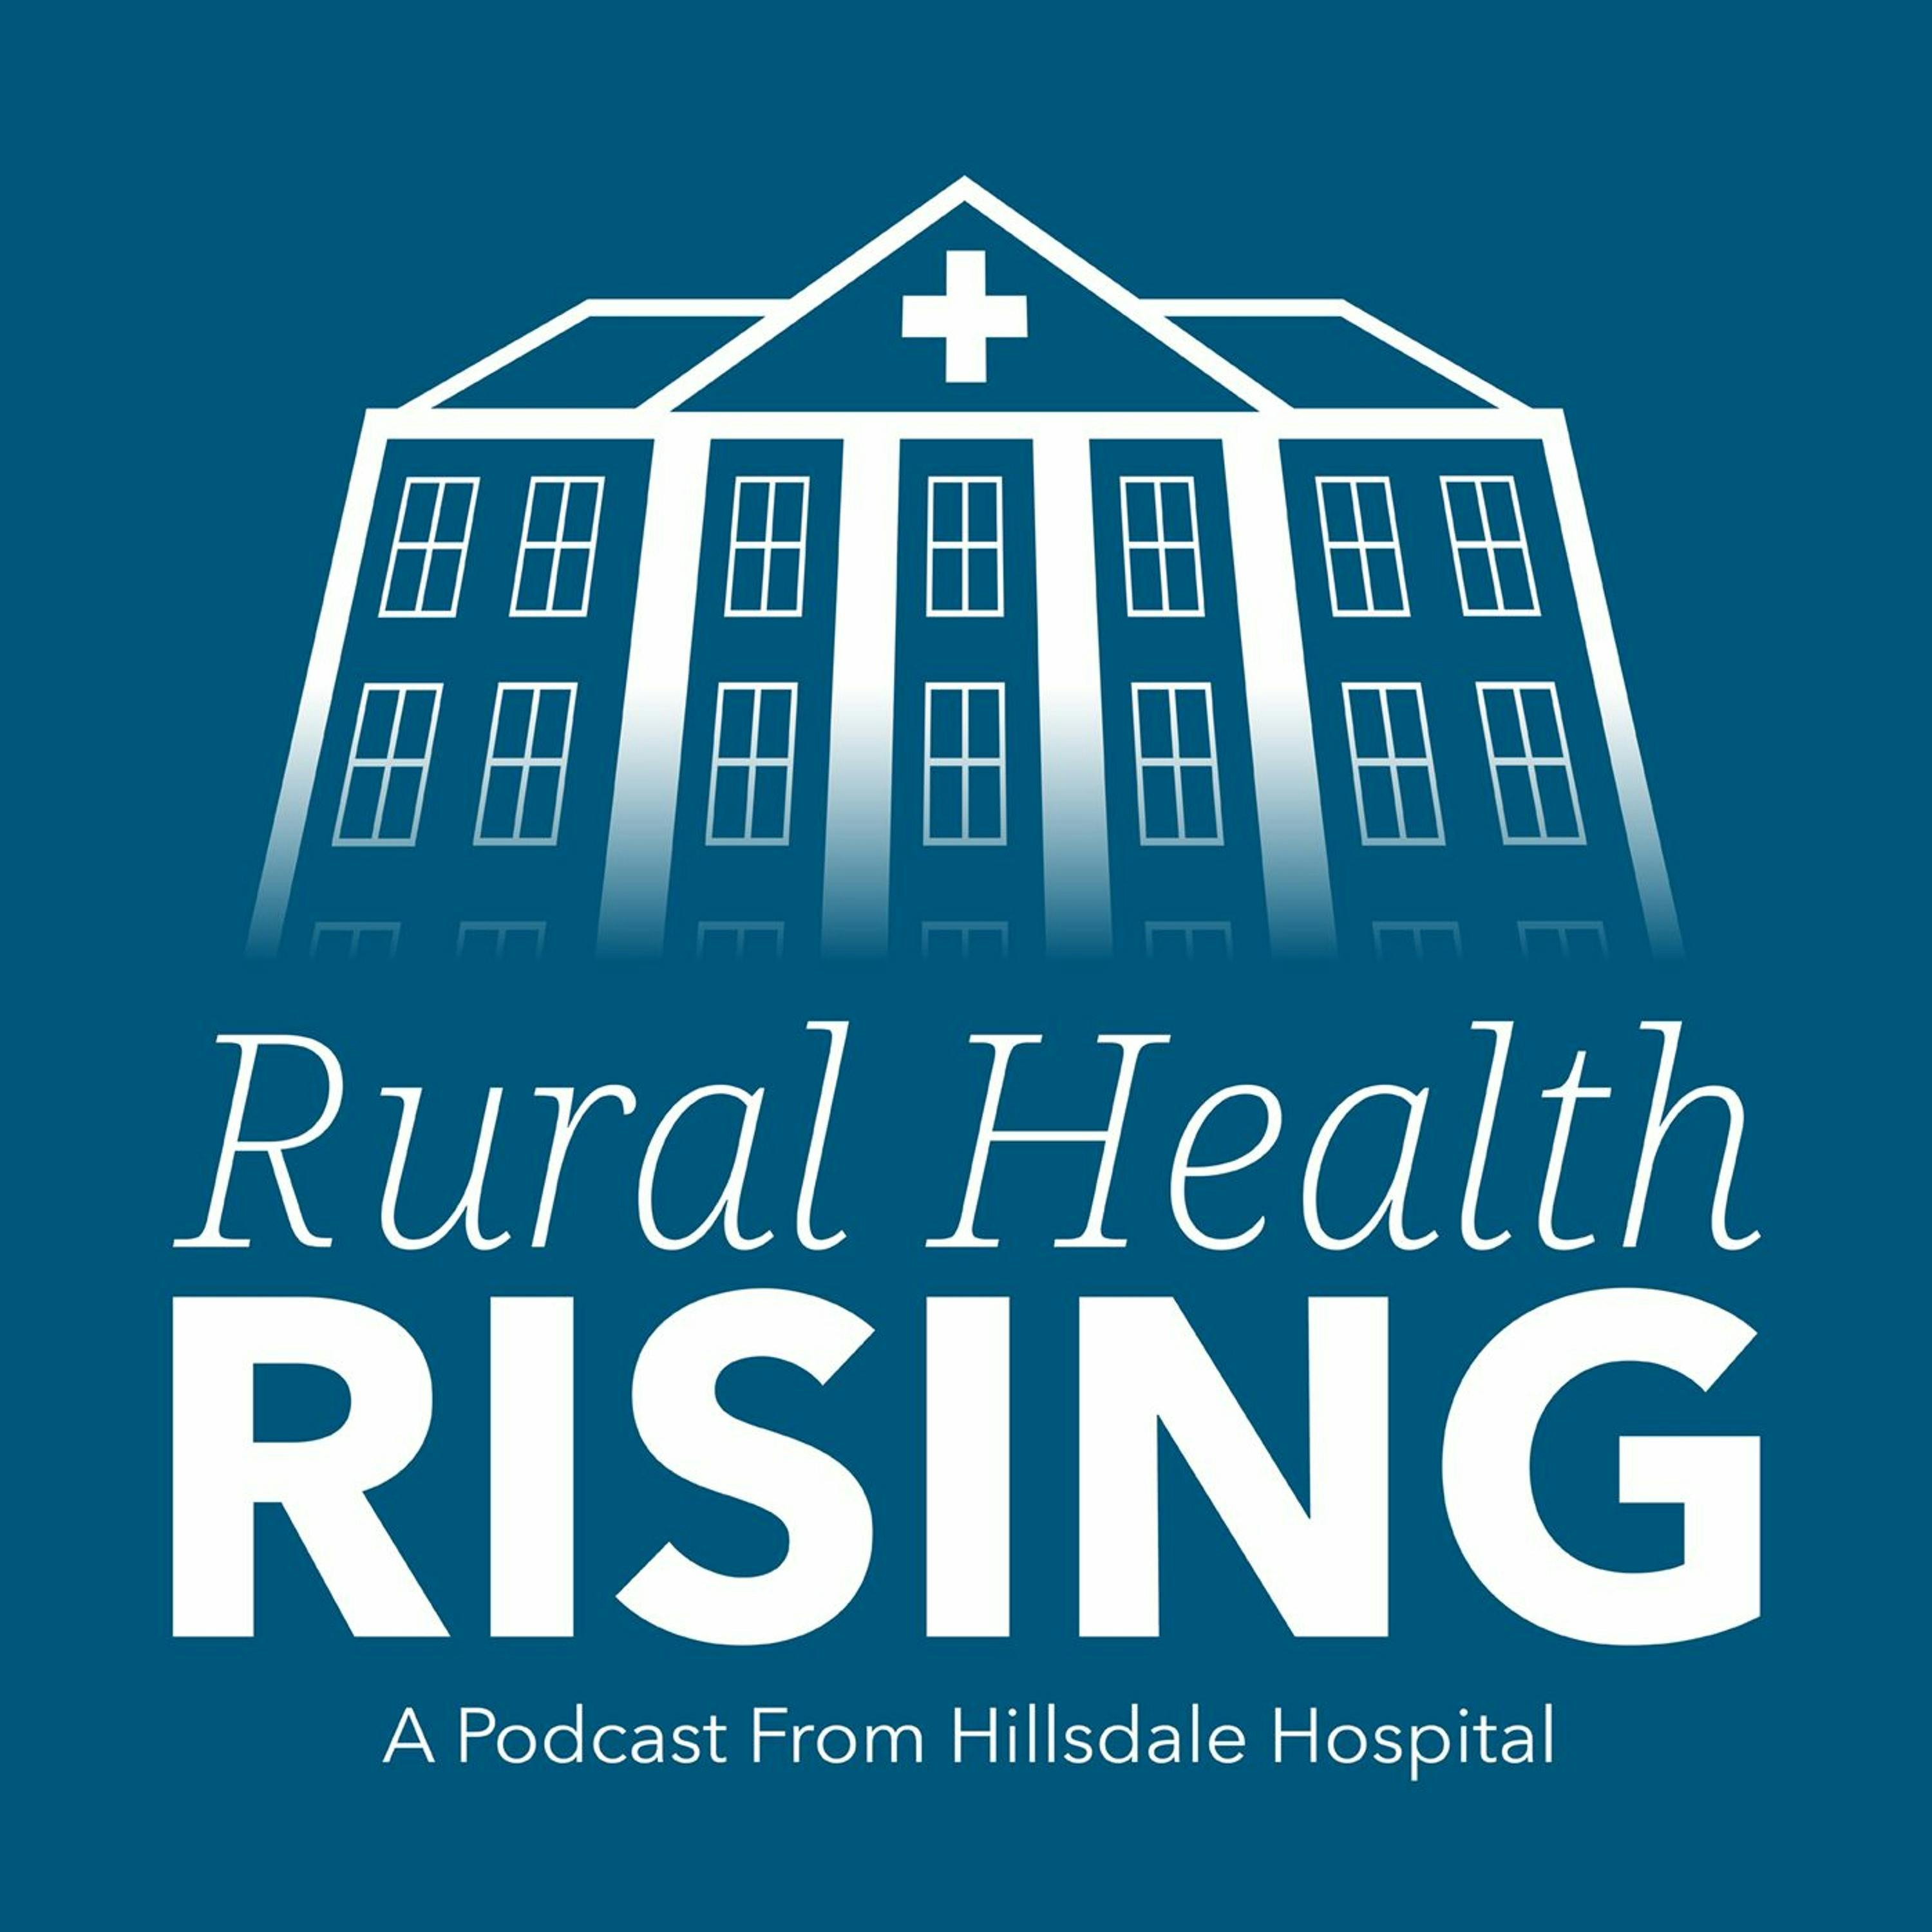 Episode 1: The State of Rural Health